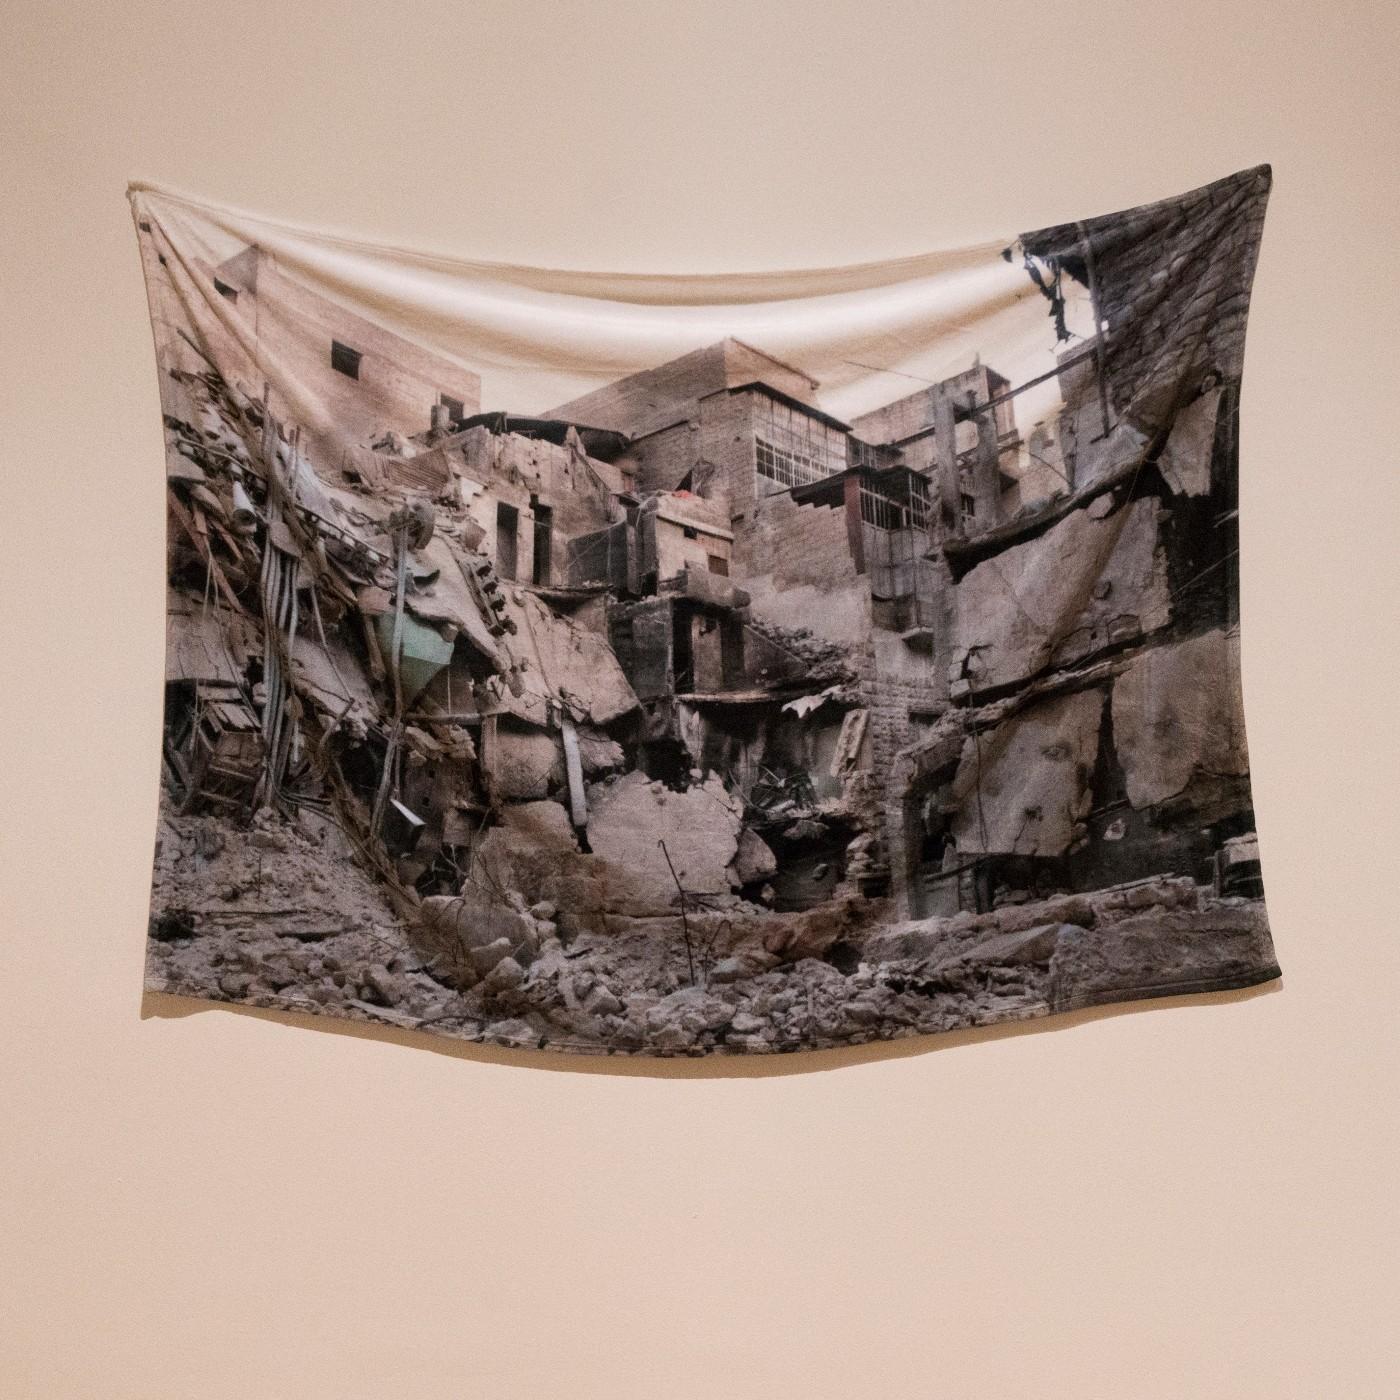 Installation view of Essma Imady: Thicker Than Water, "Receiving Blanket"